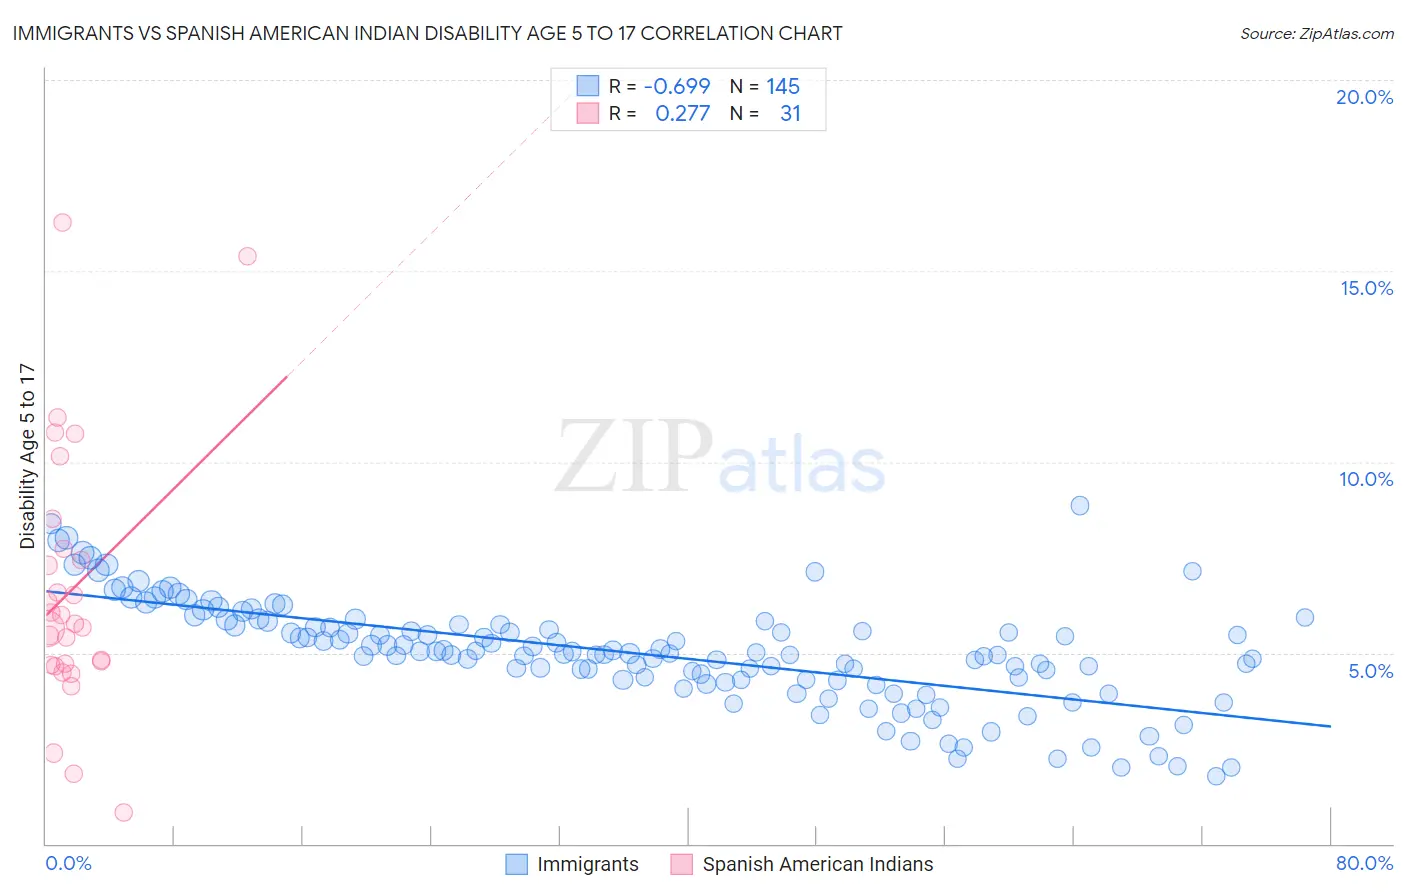 Immigrants vs Spanish American Indian Disability Age 5 to 17